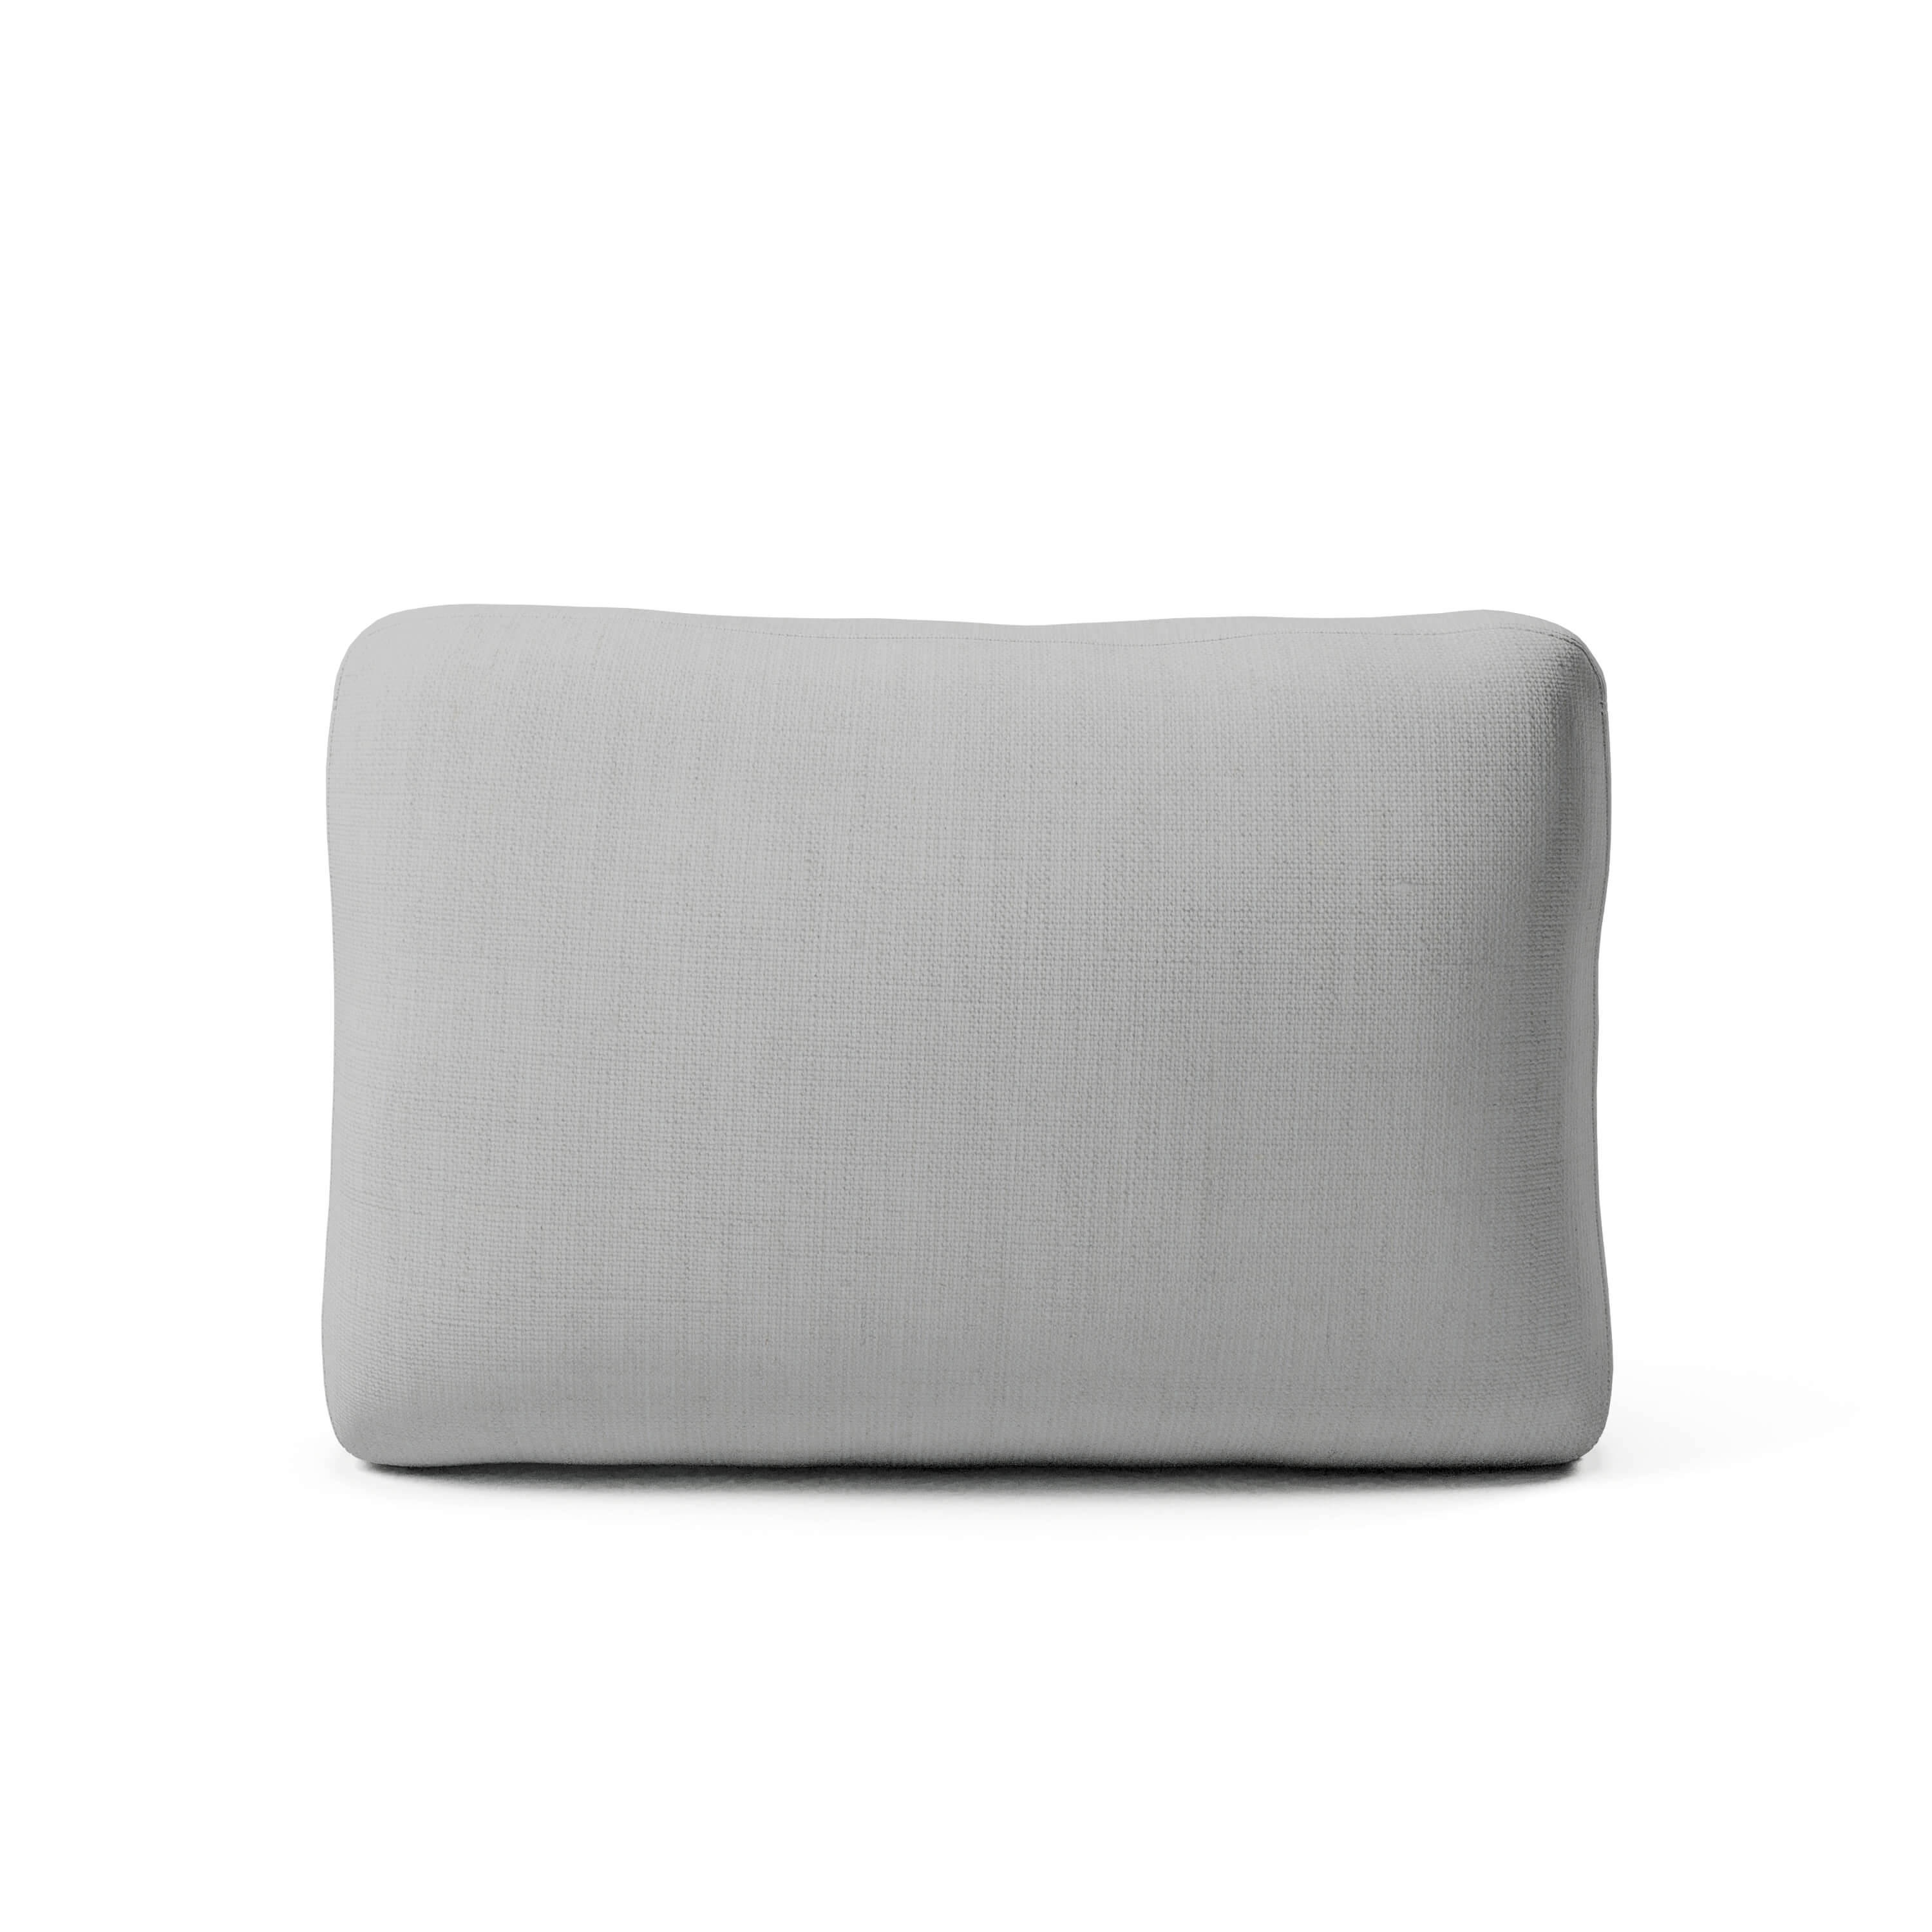 Comfy Sofa - Side Cushion Replacement